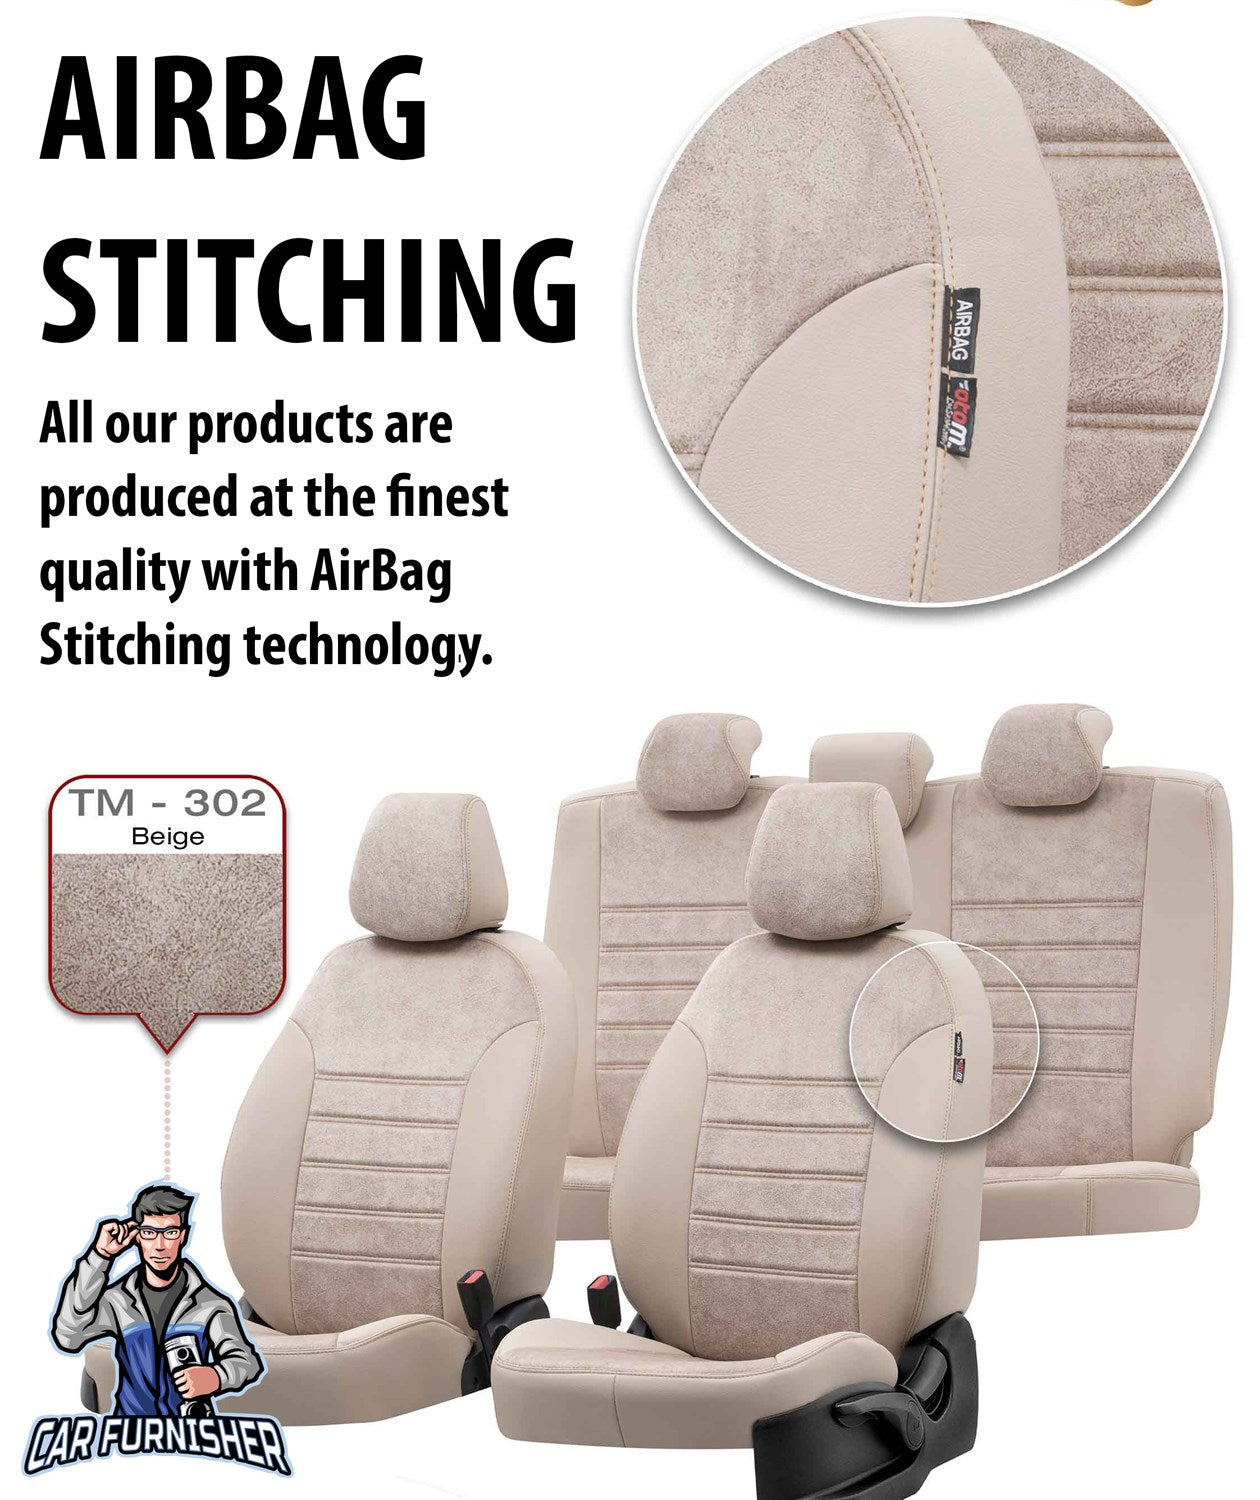 Landrover Freelander Car Seat Covers 1998-2012 Milano Design Beige Leather & Suede Fabric